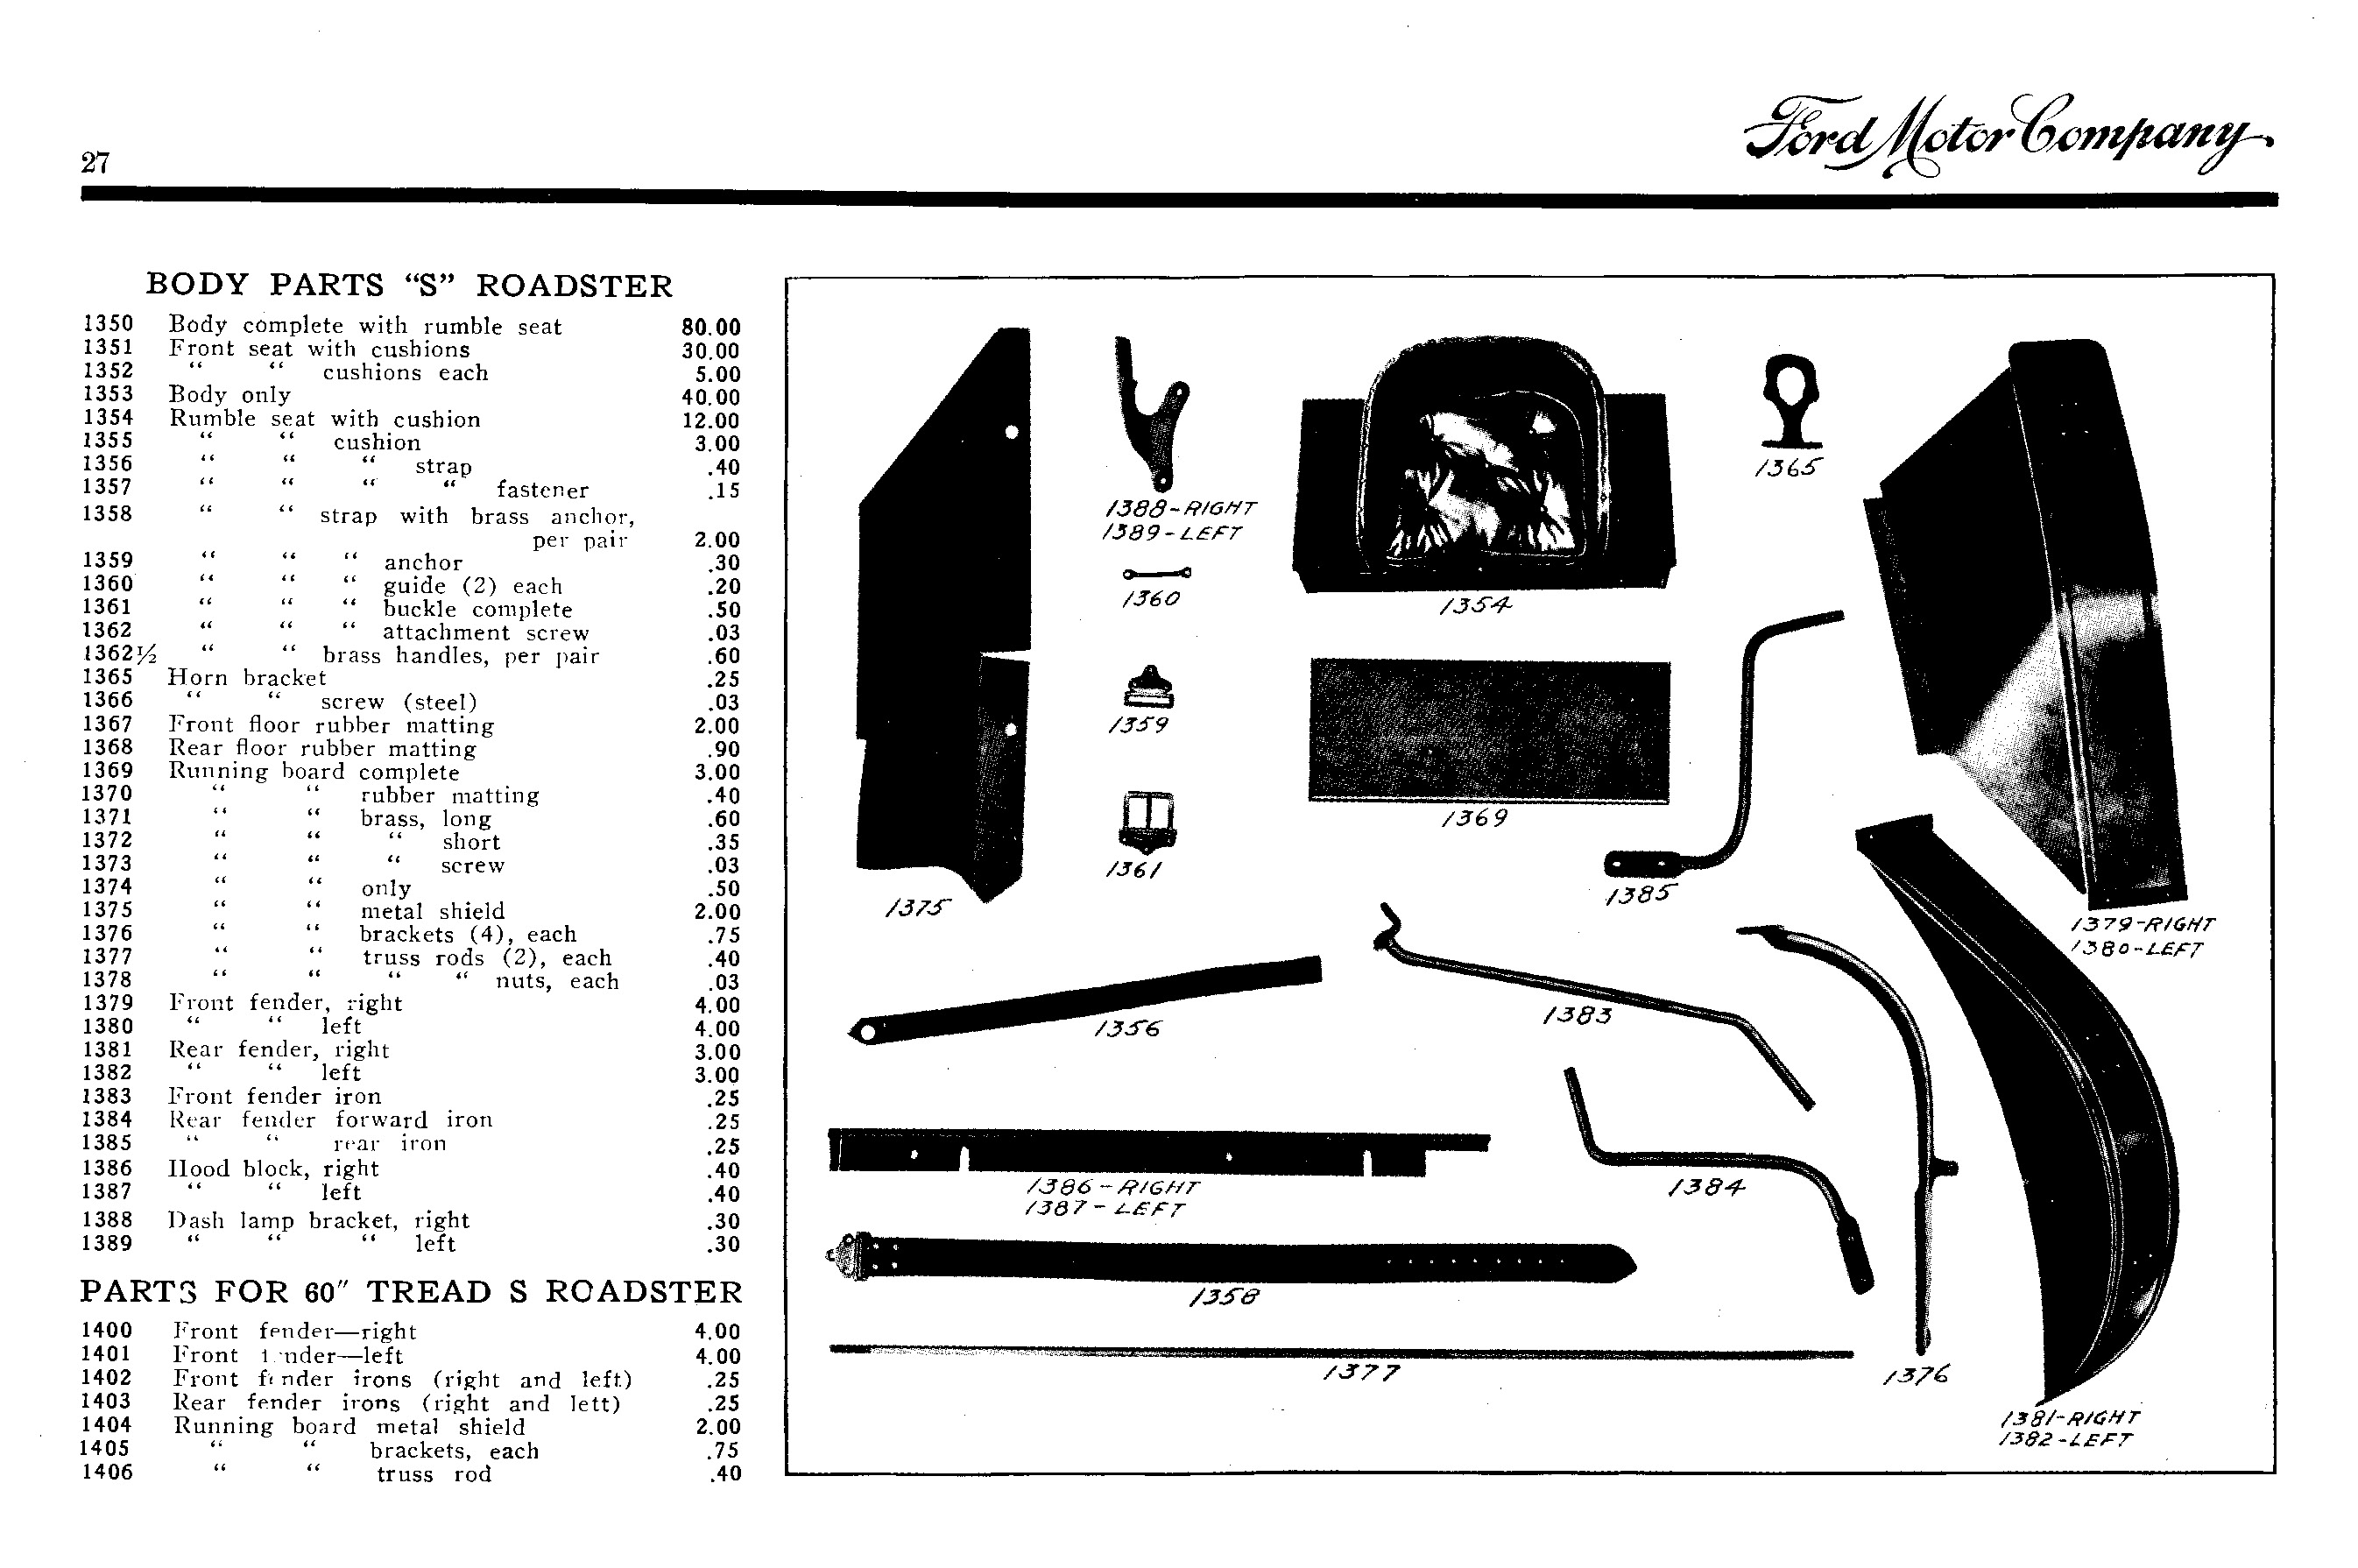 1907_Ford_Roadster_Parts_List-27